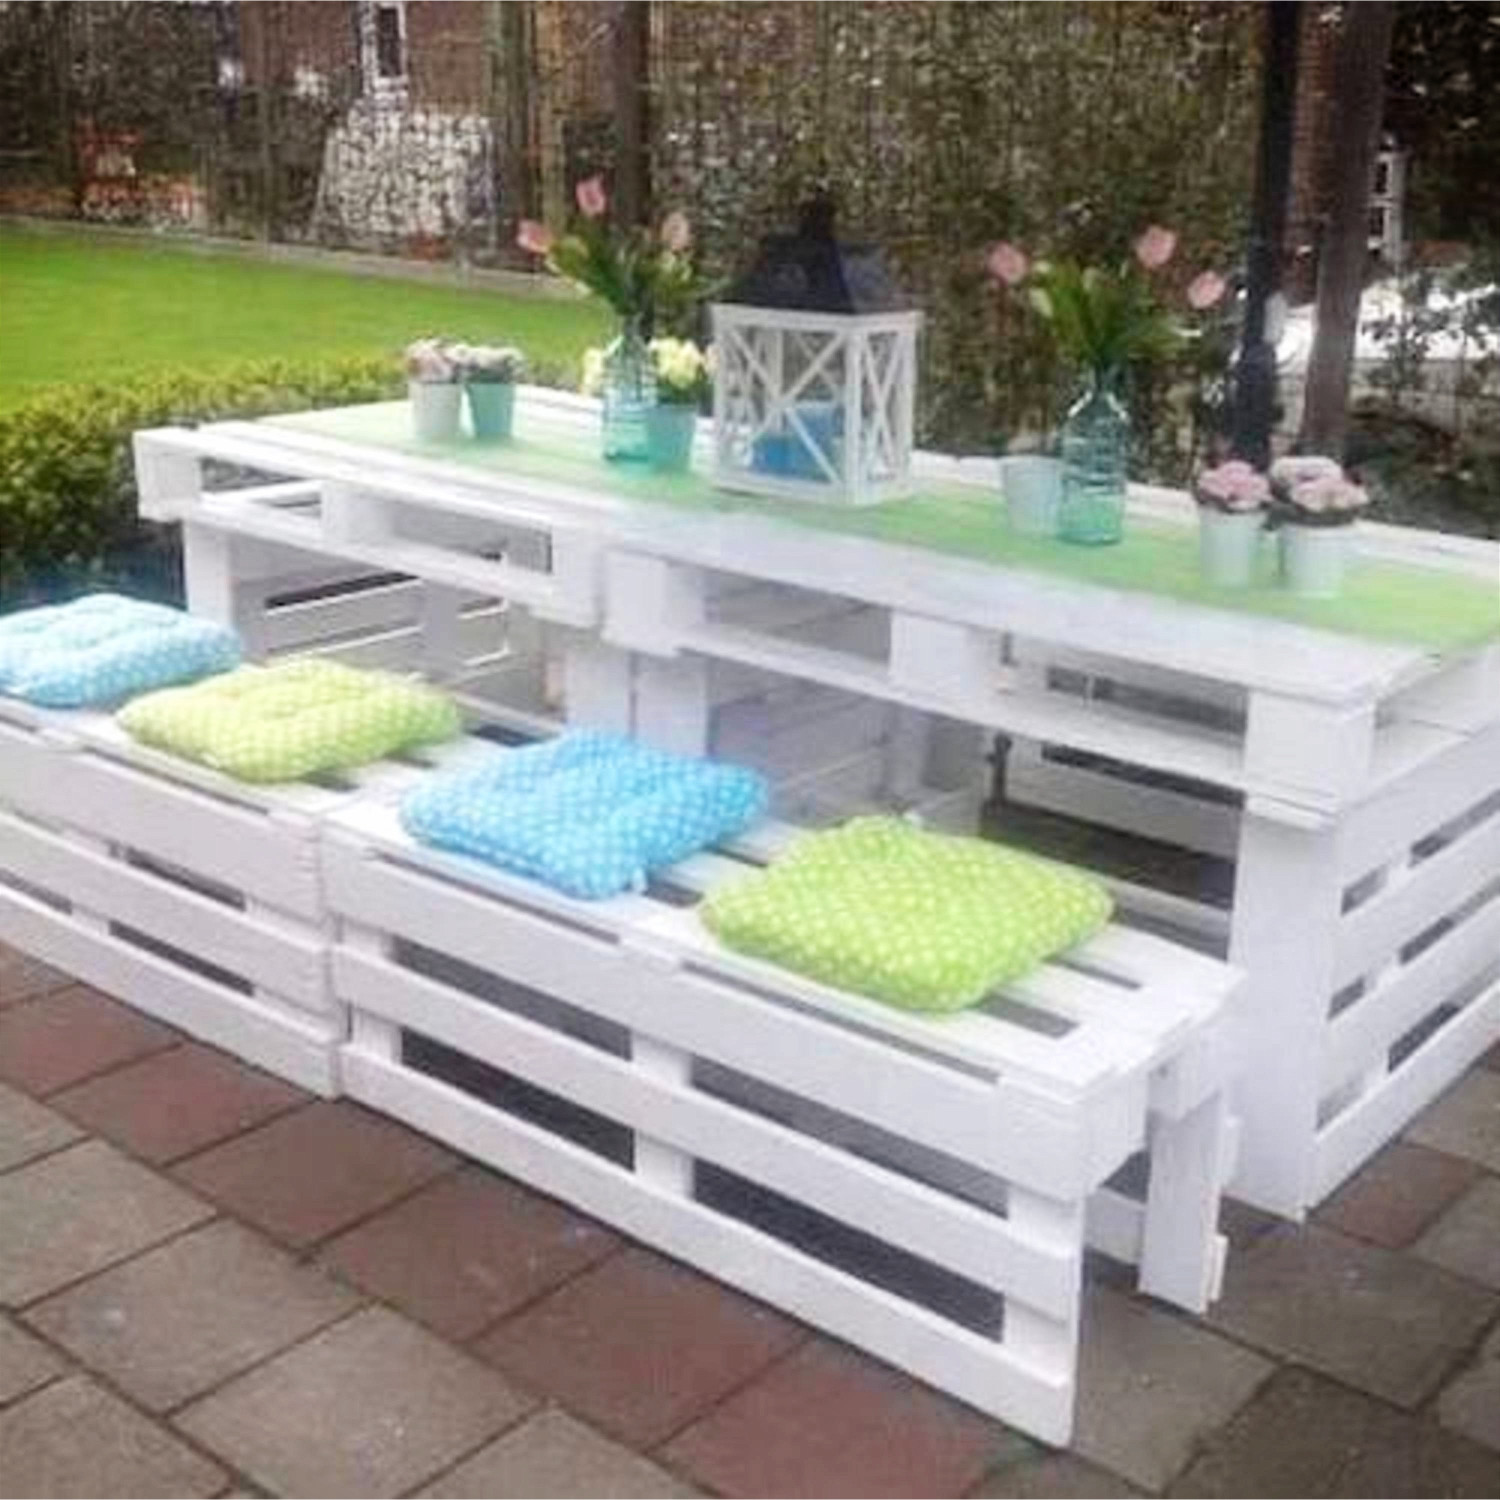 This is brilliant!  DIY pallet picnic table and benches.  Love things that are made out of old pallet wood and this picnic table and benches are just gorgeous.  Love that they painted it white - it looks so pretty!